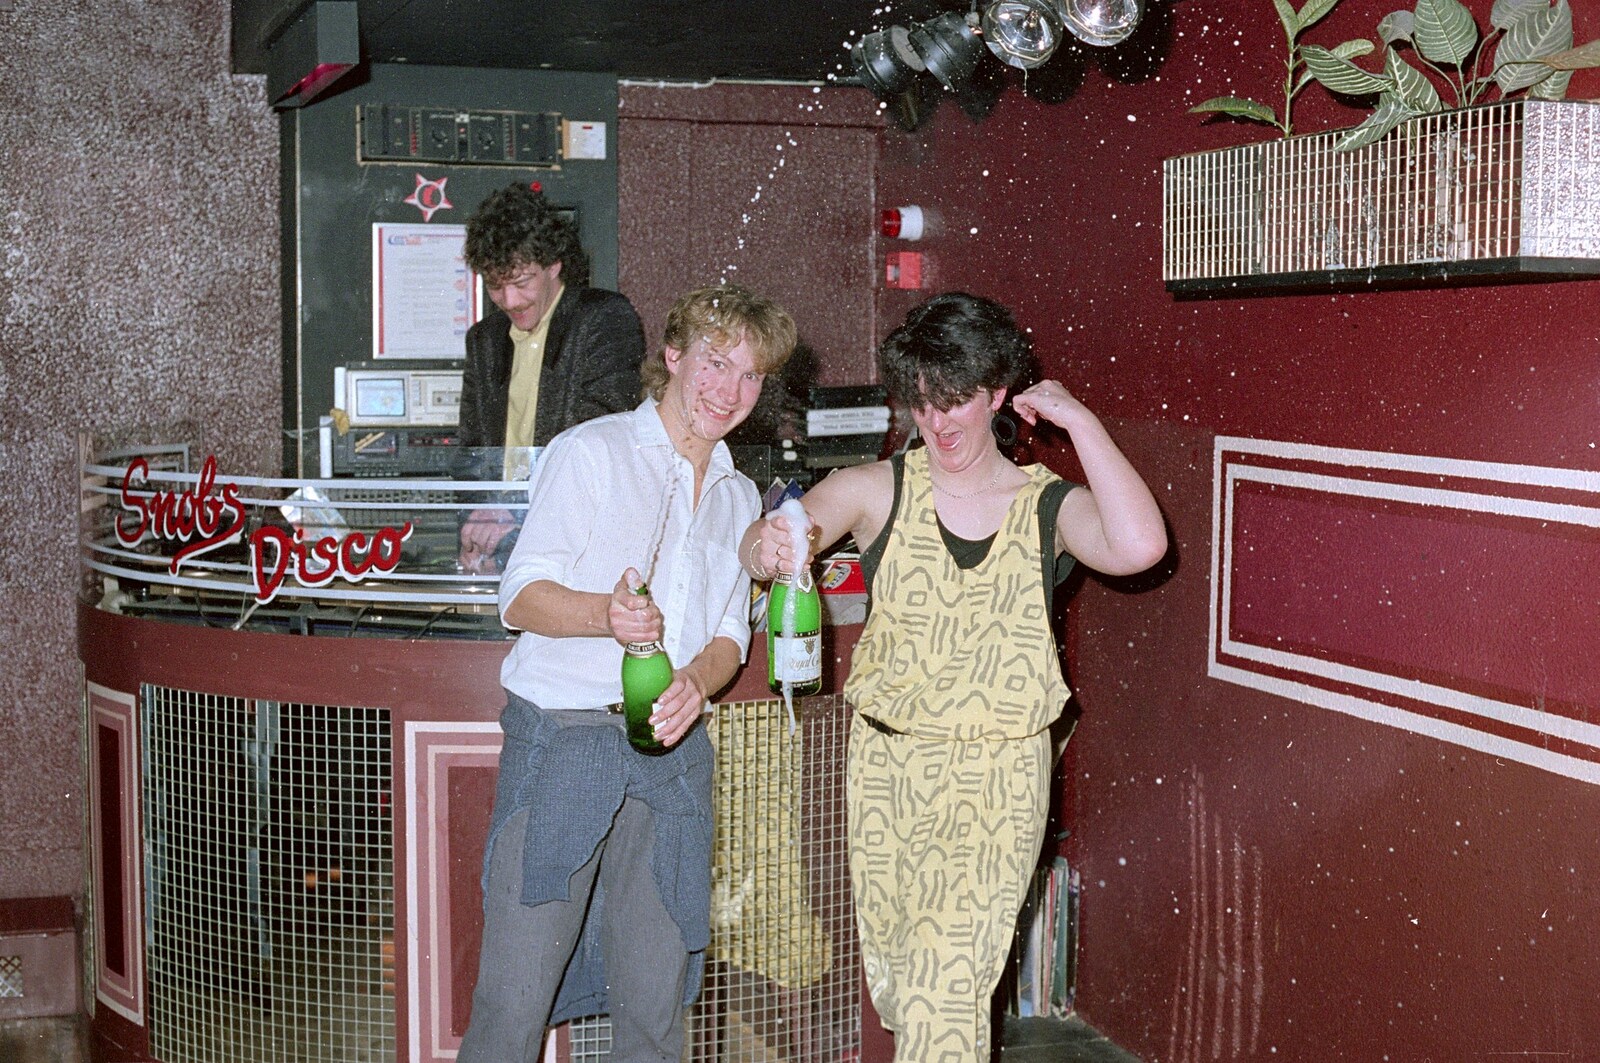 There's a good squirt of fizz going on from Uni: A Party in Snobs Nightclub, Mayflower Street, Plymouth - 18th October 1986